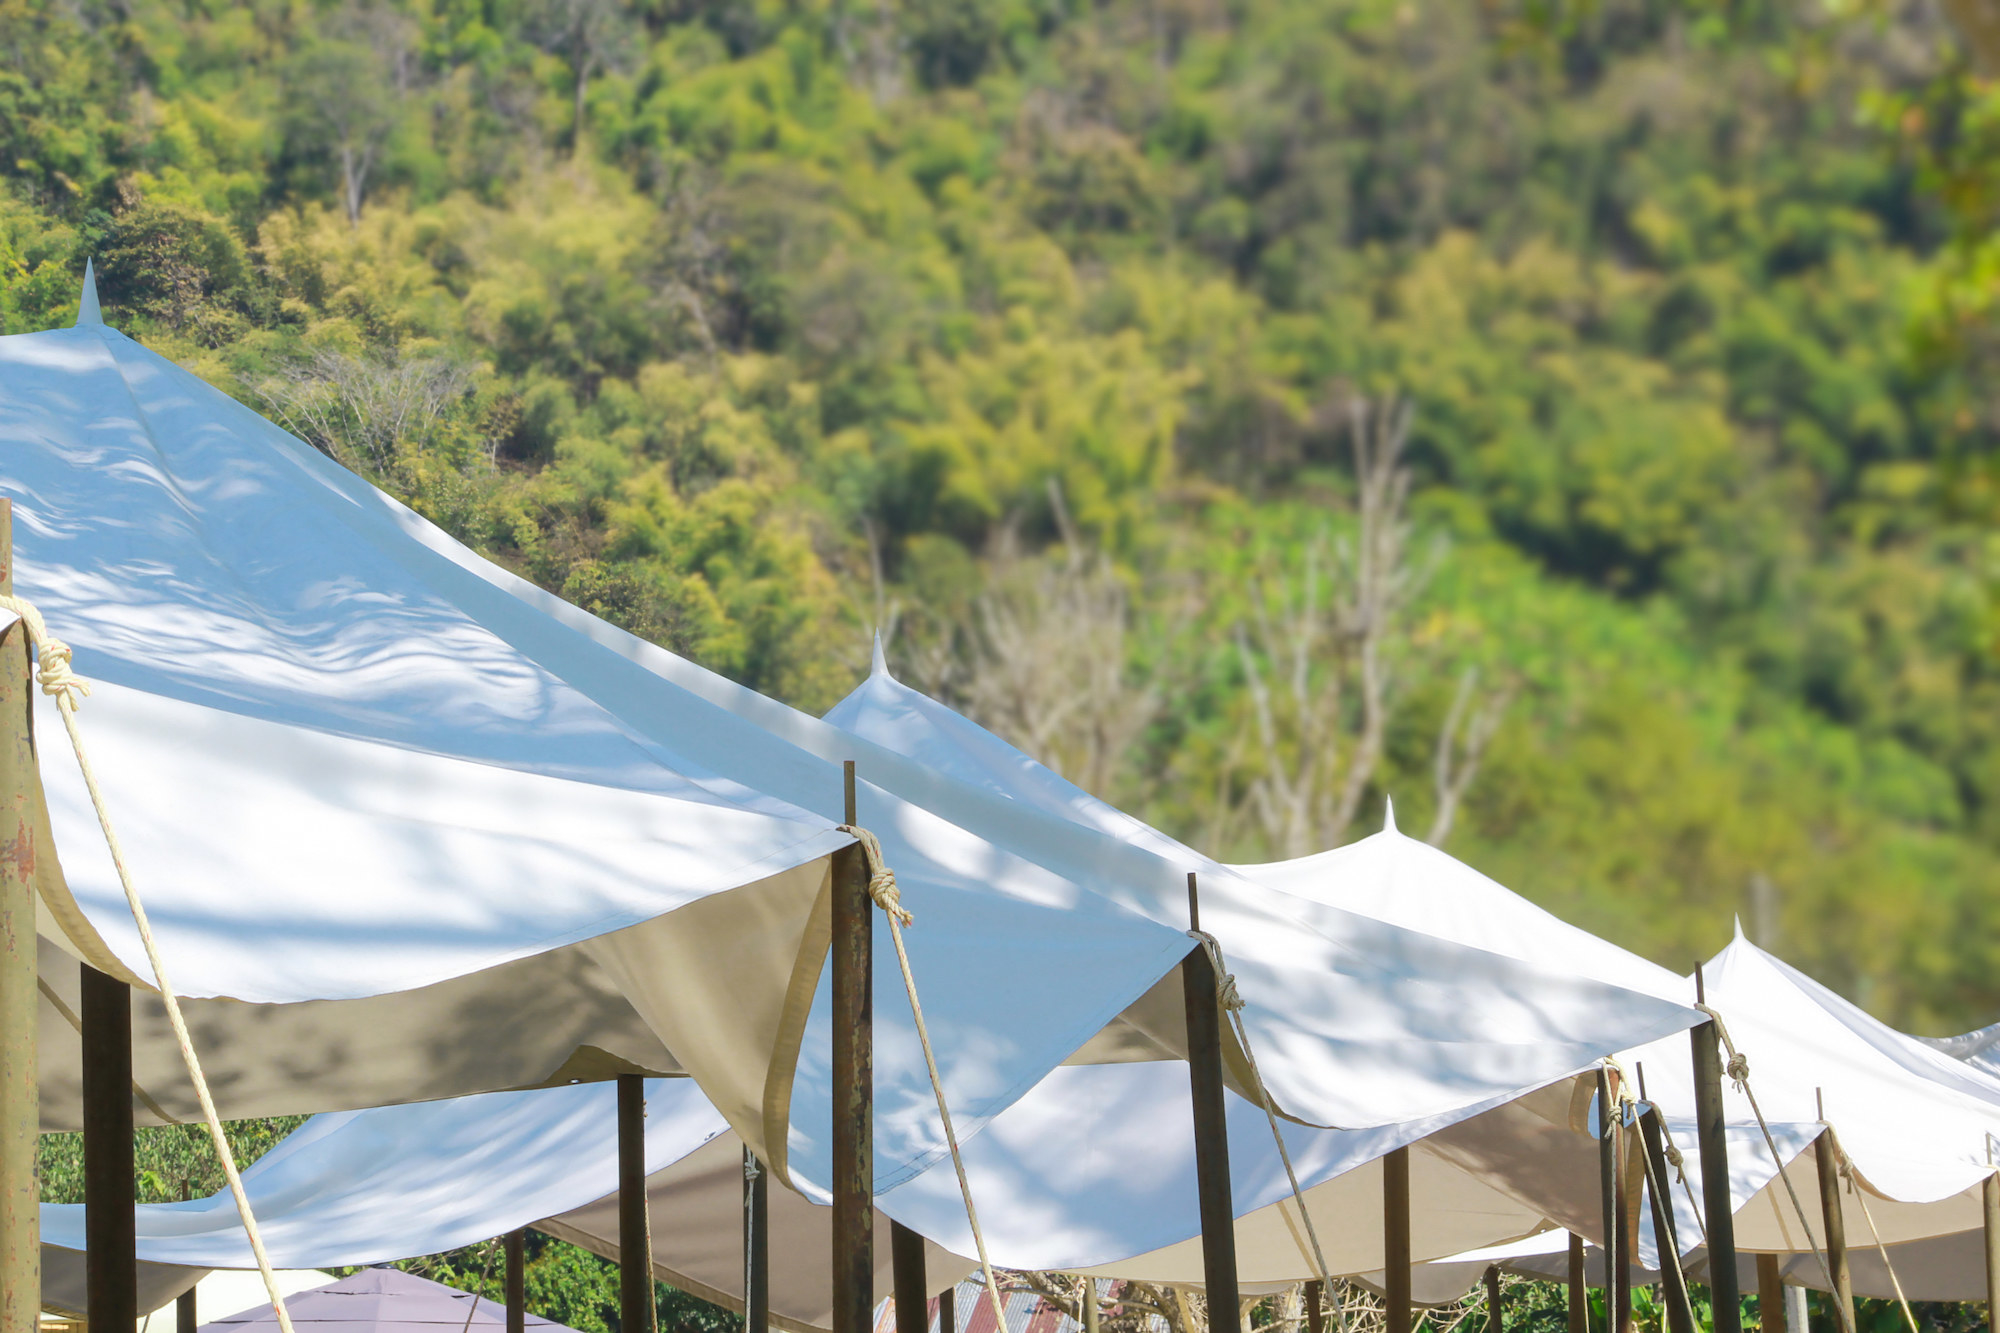 Large white event tents with greenery background